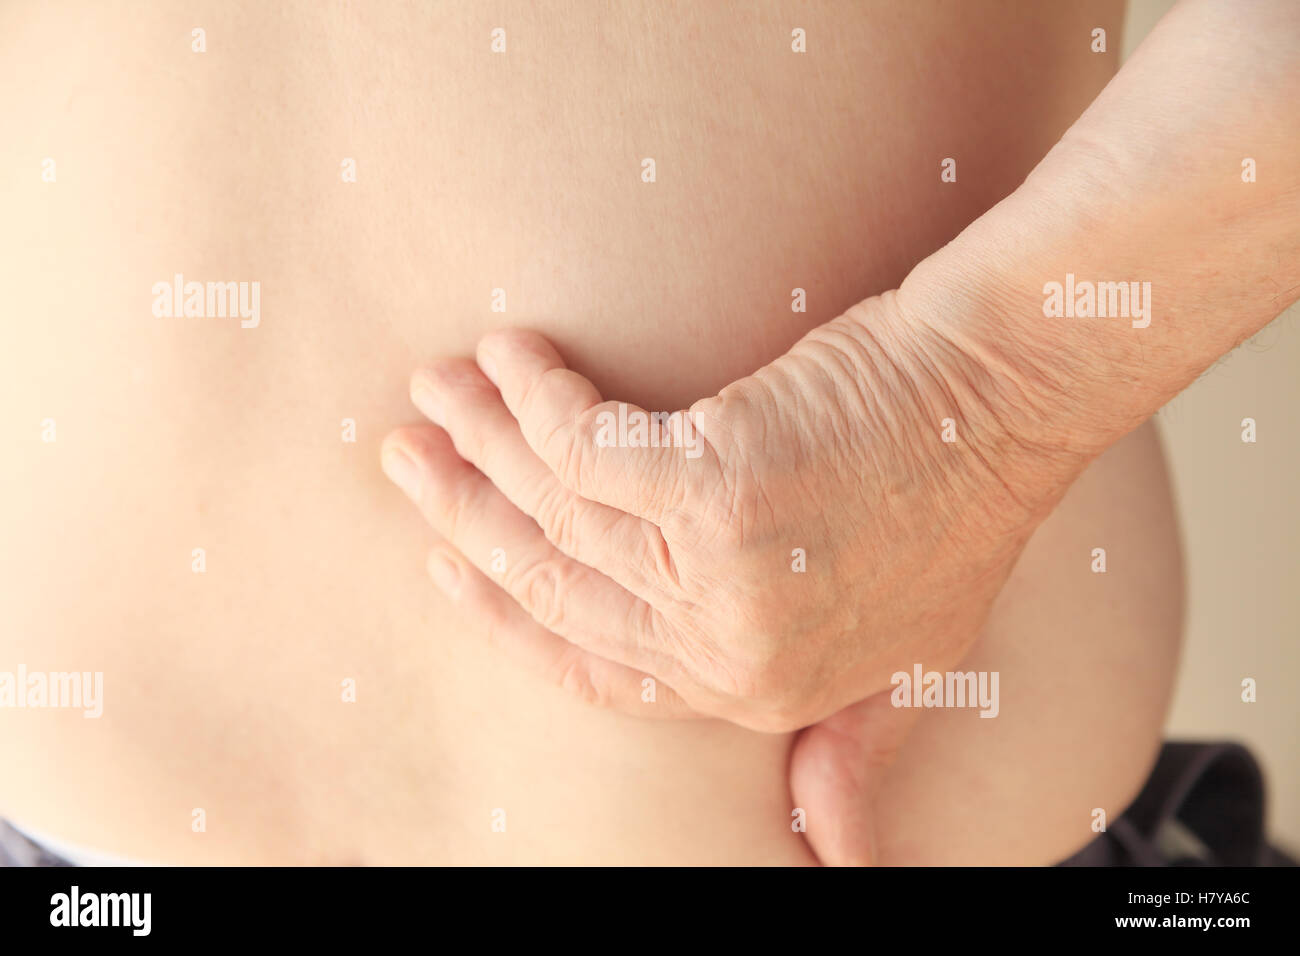 An older man reaches to the location of his backache. Stock Photo